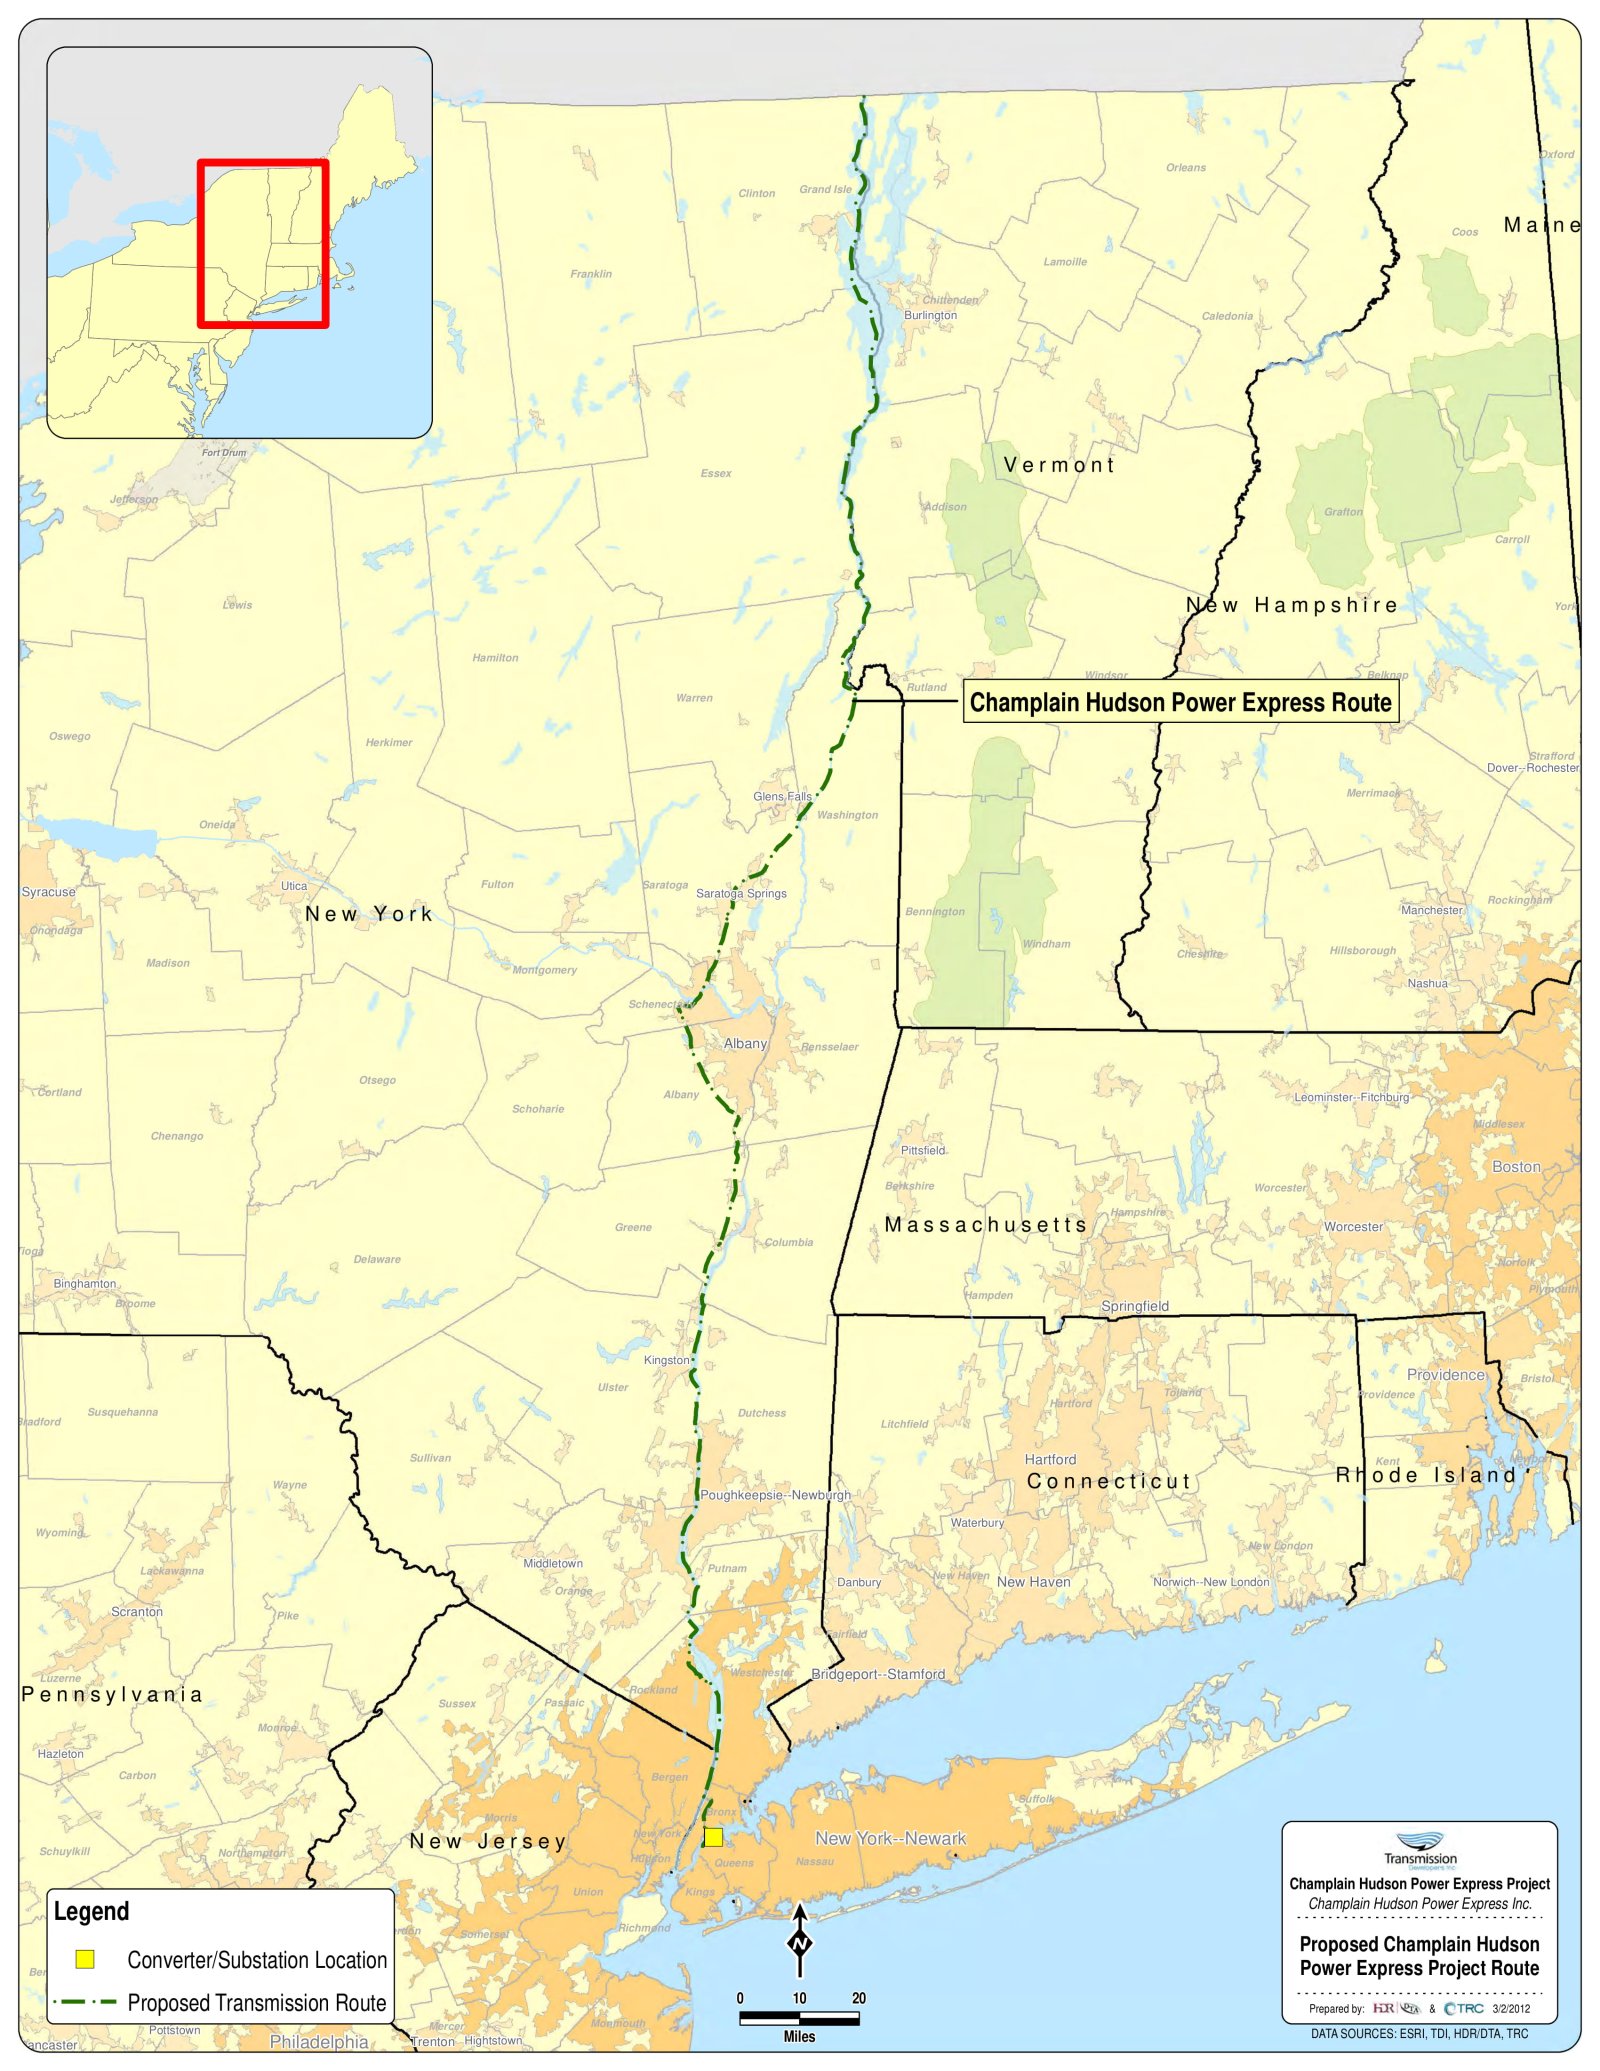 The proposed route of the Champlain-Hudson Power Express